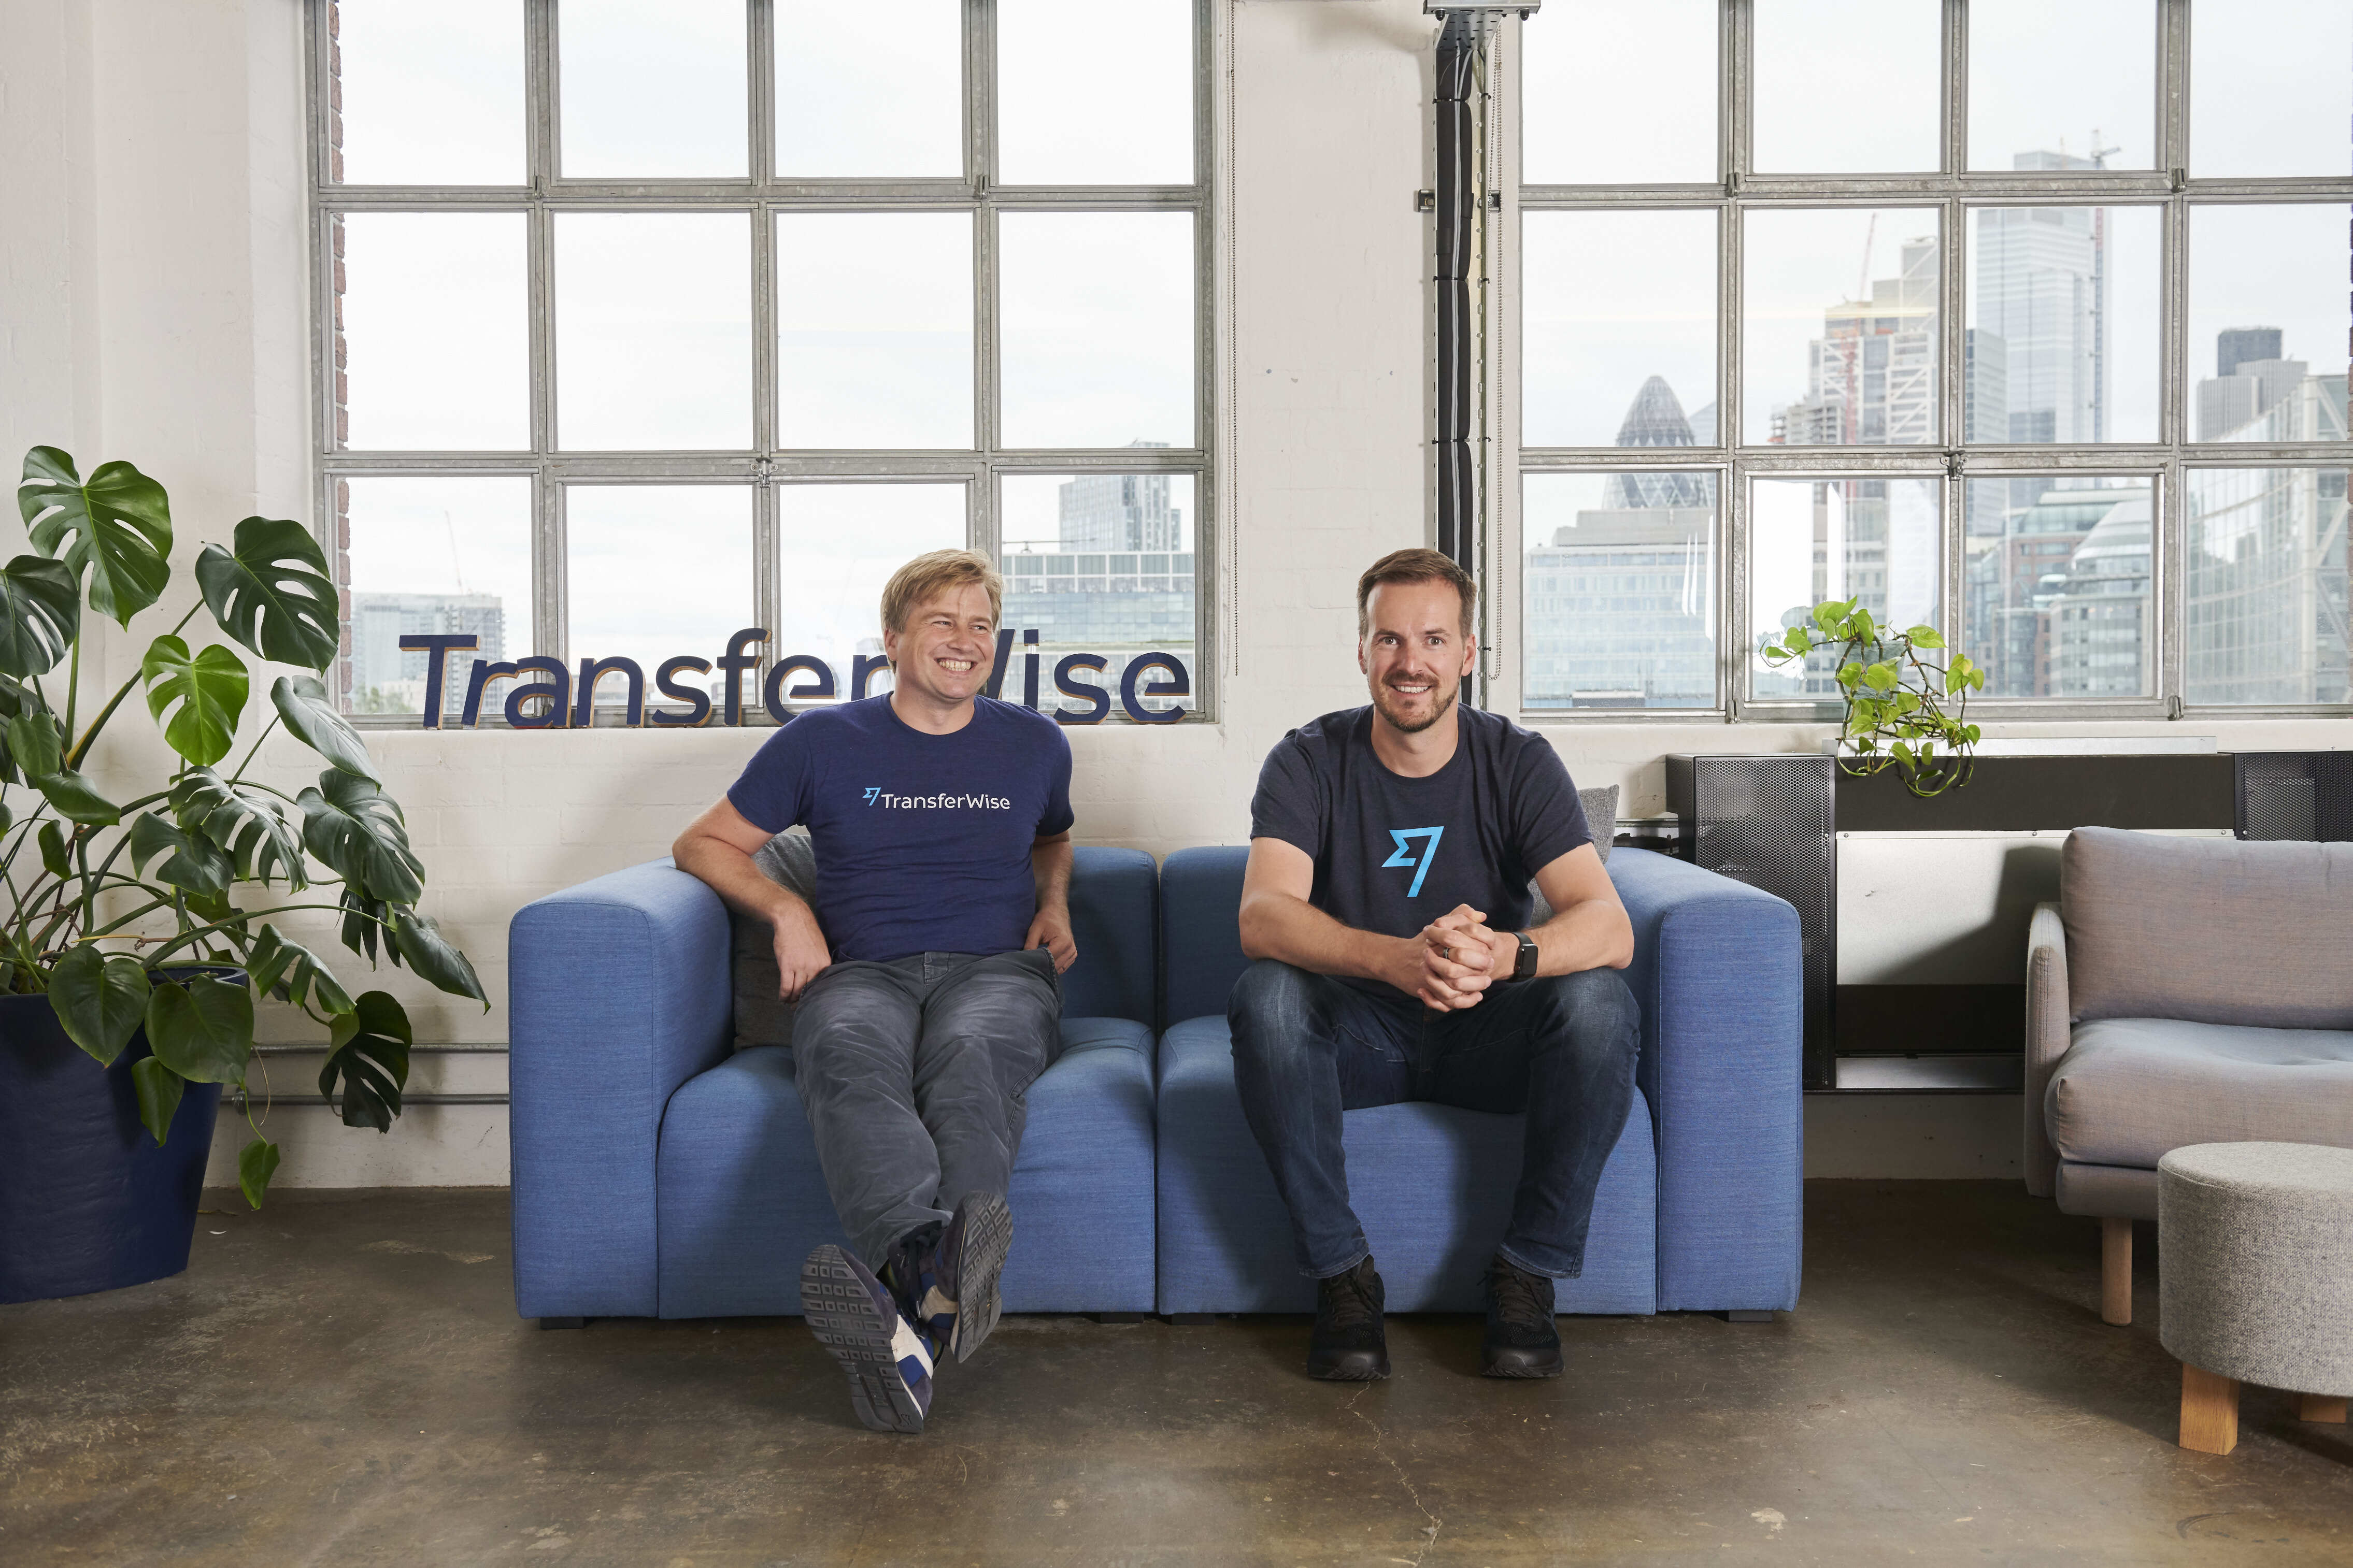 Fintech start-up TransferWise is set to launch an investments feature - CNBC